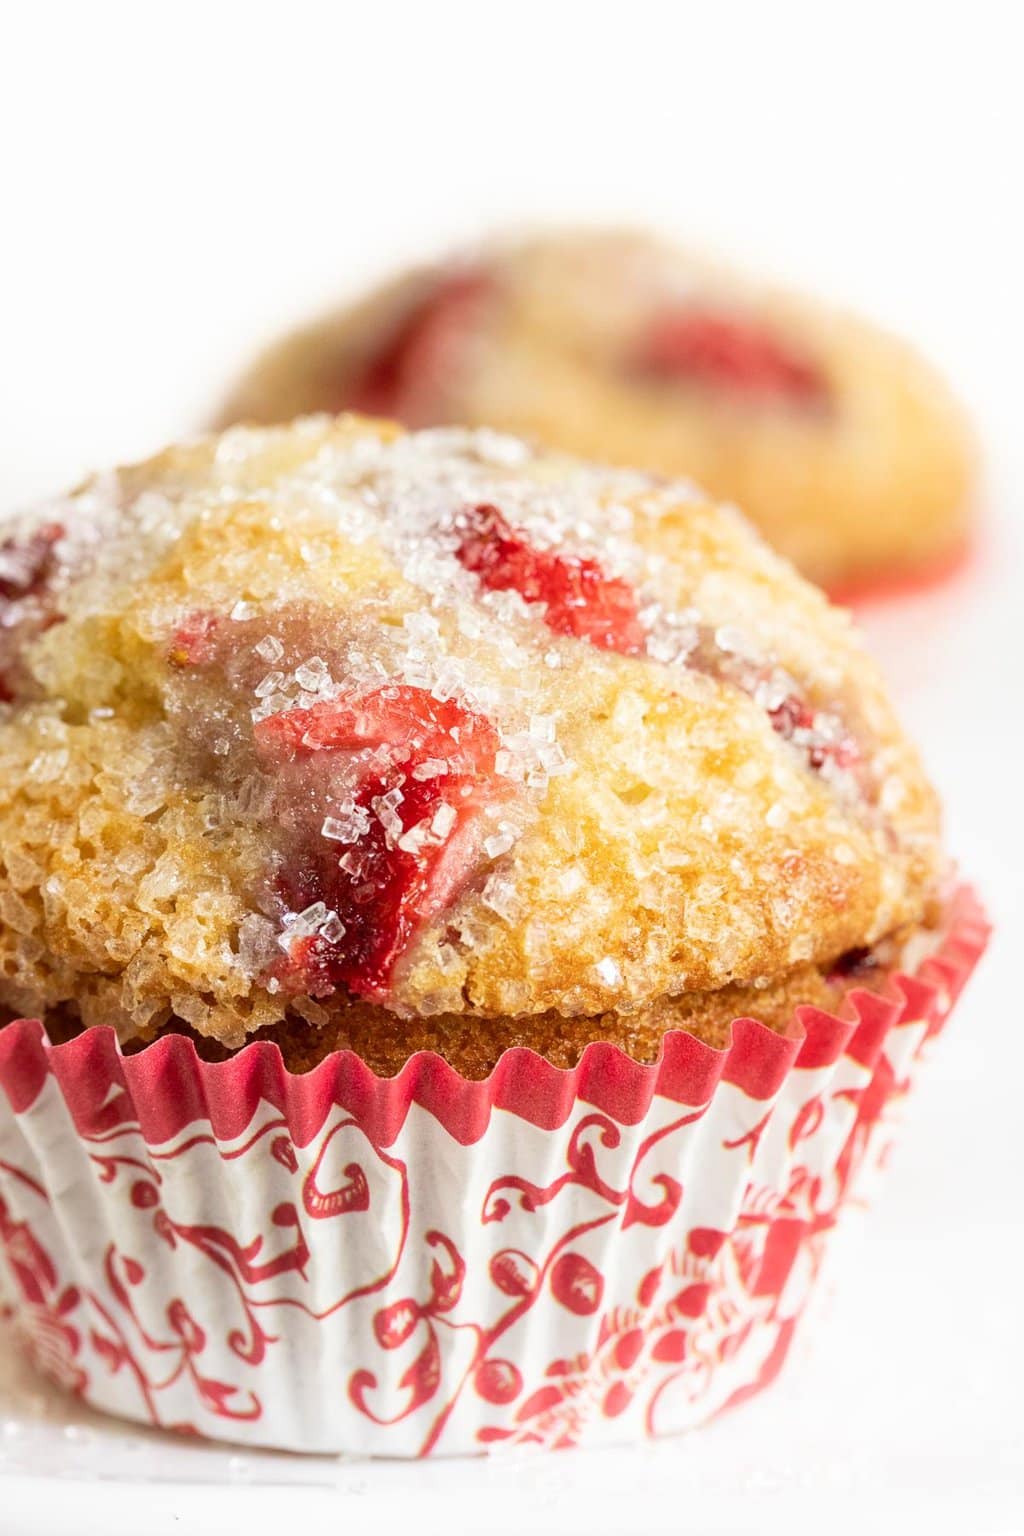 Extreme vertical closeup photo of a Fresh Strawberry Buttermilk Muffin in a red and white patterned cupcake liner.